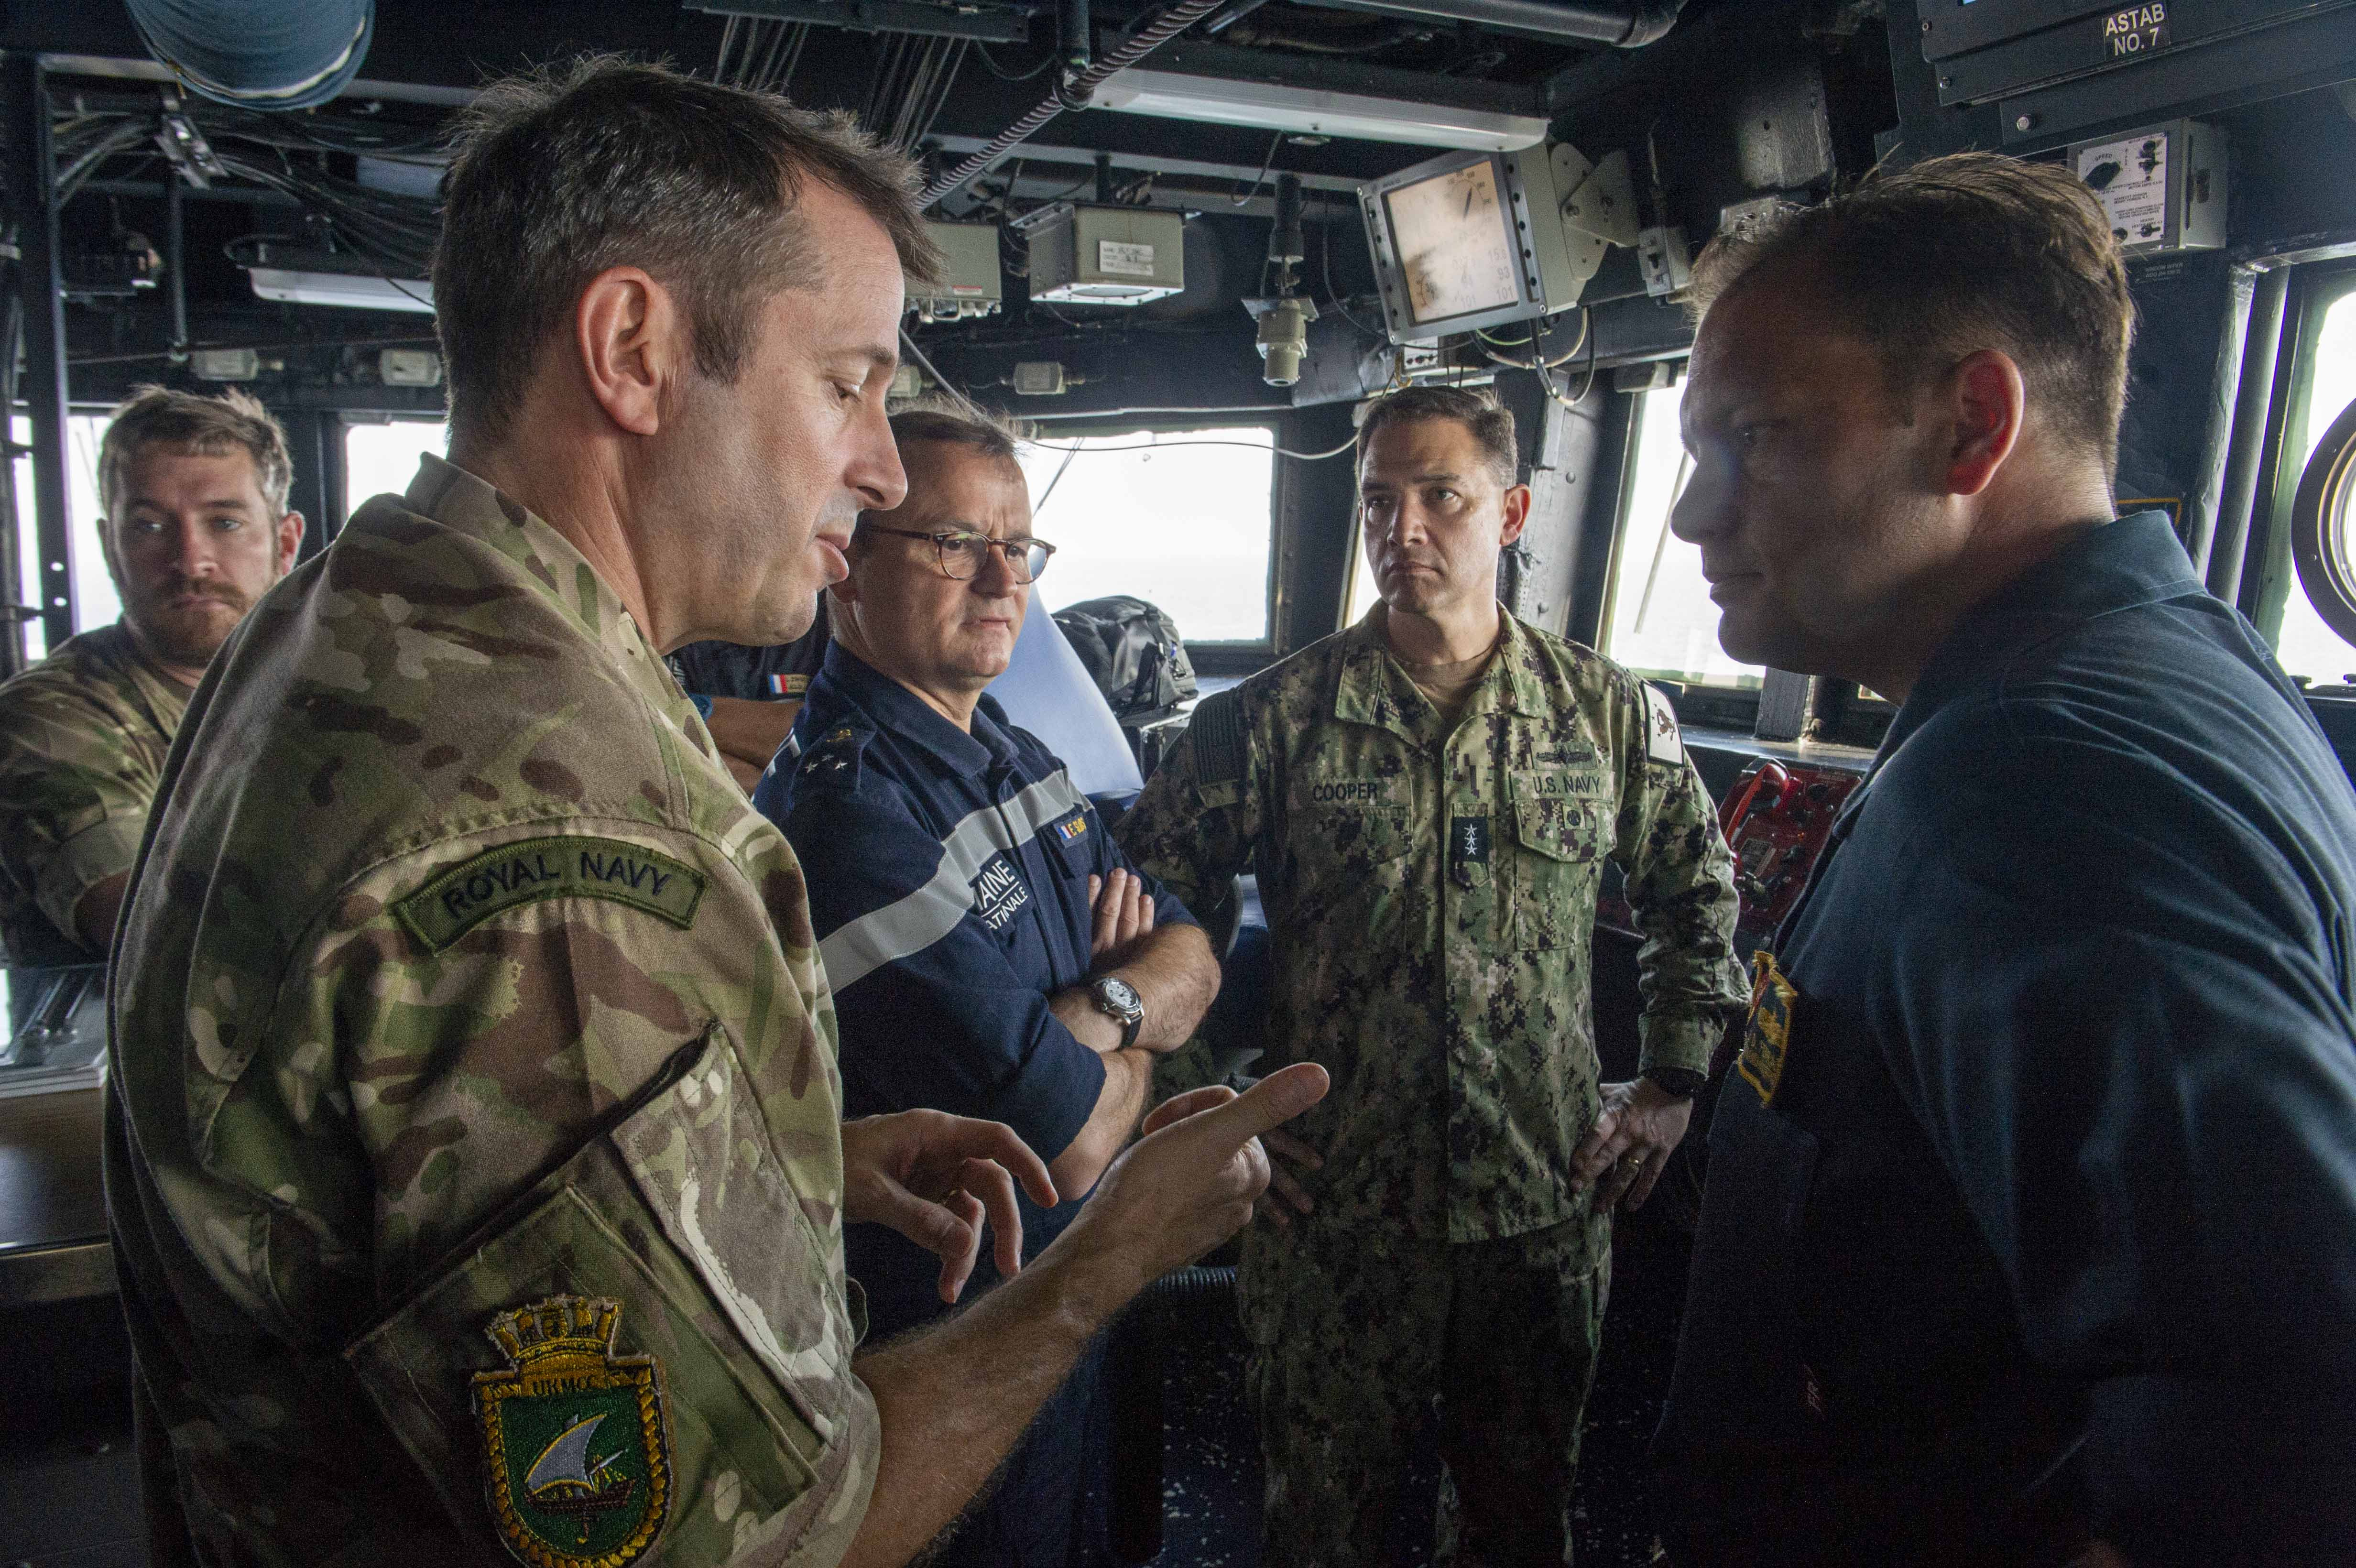 U.S. French and UK Naval Commanders Transit Key Strait of Hormuz In Show Of Force To Iran